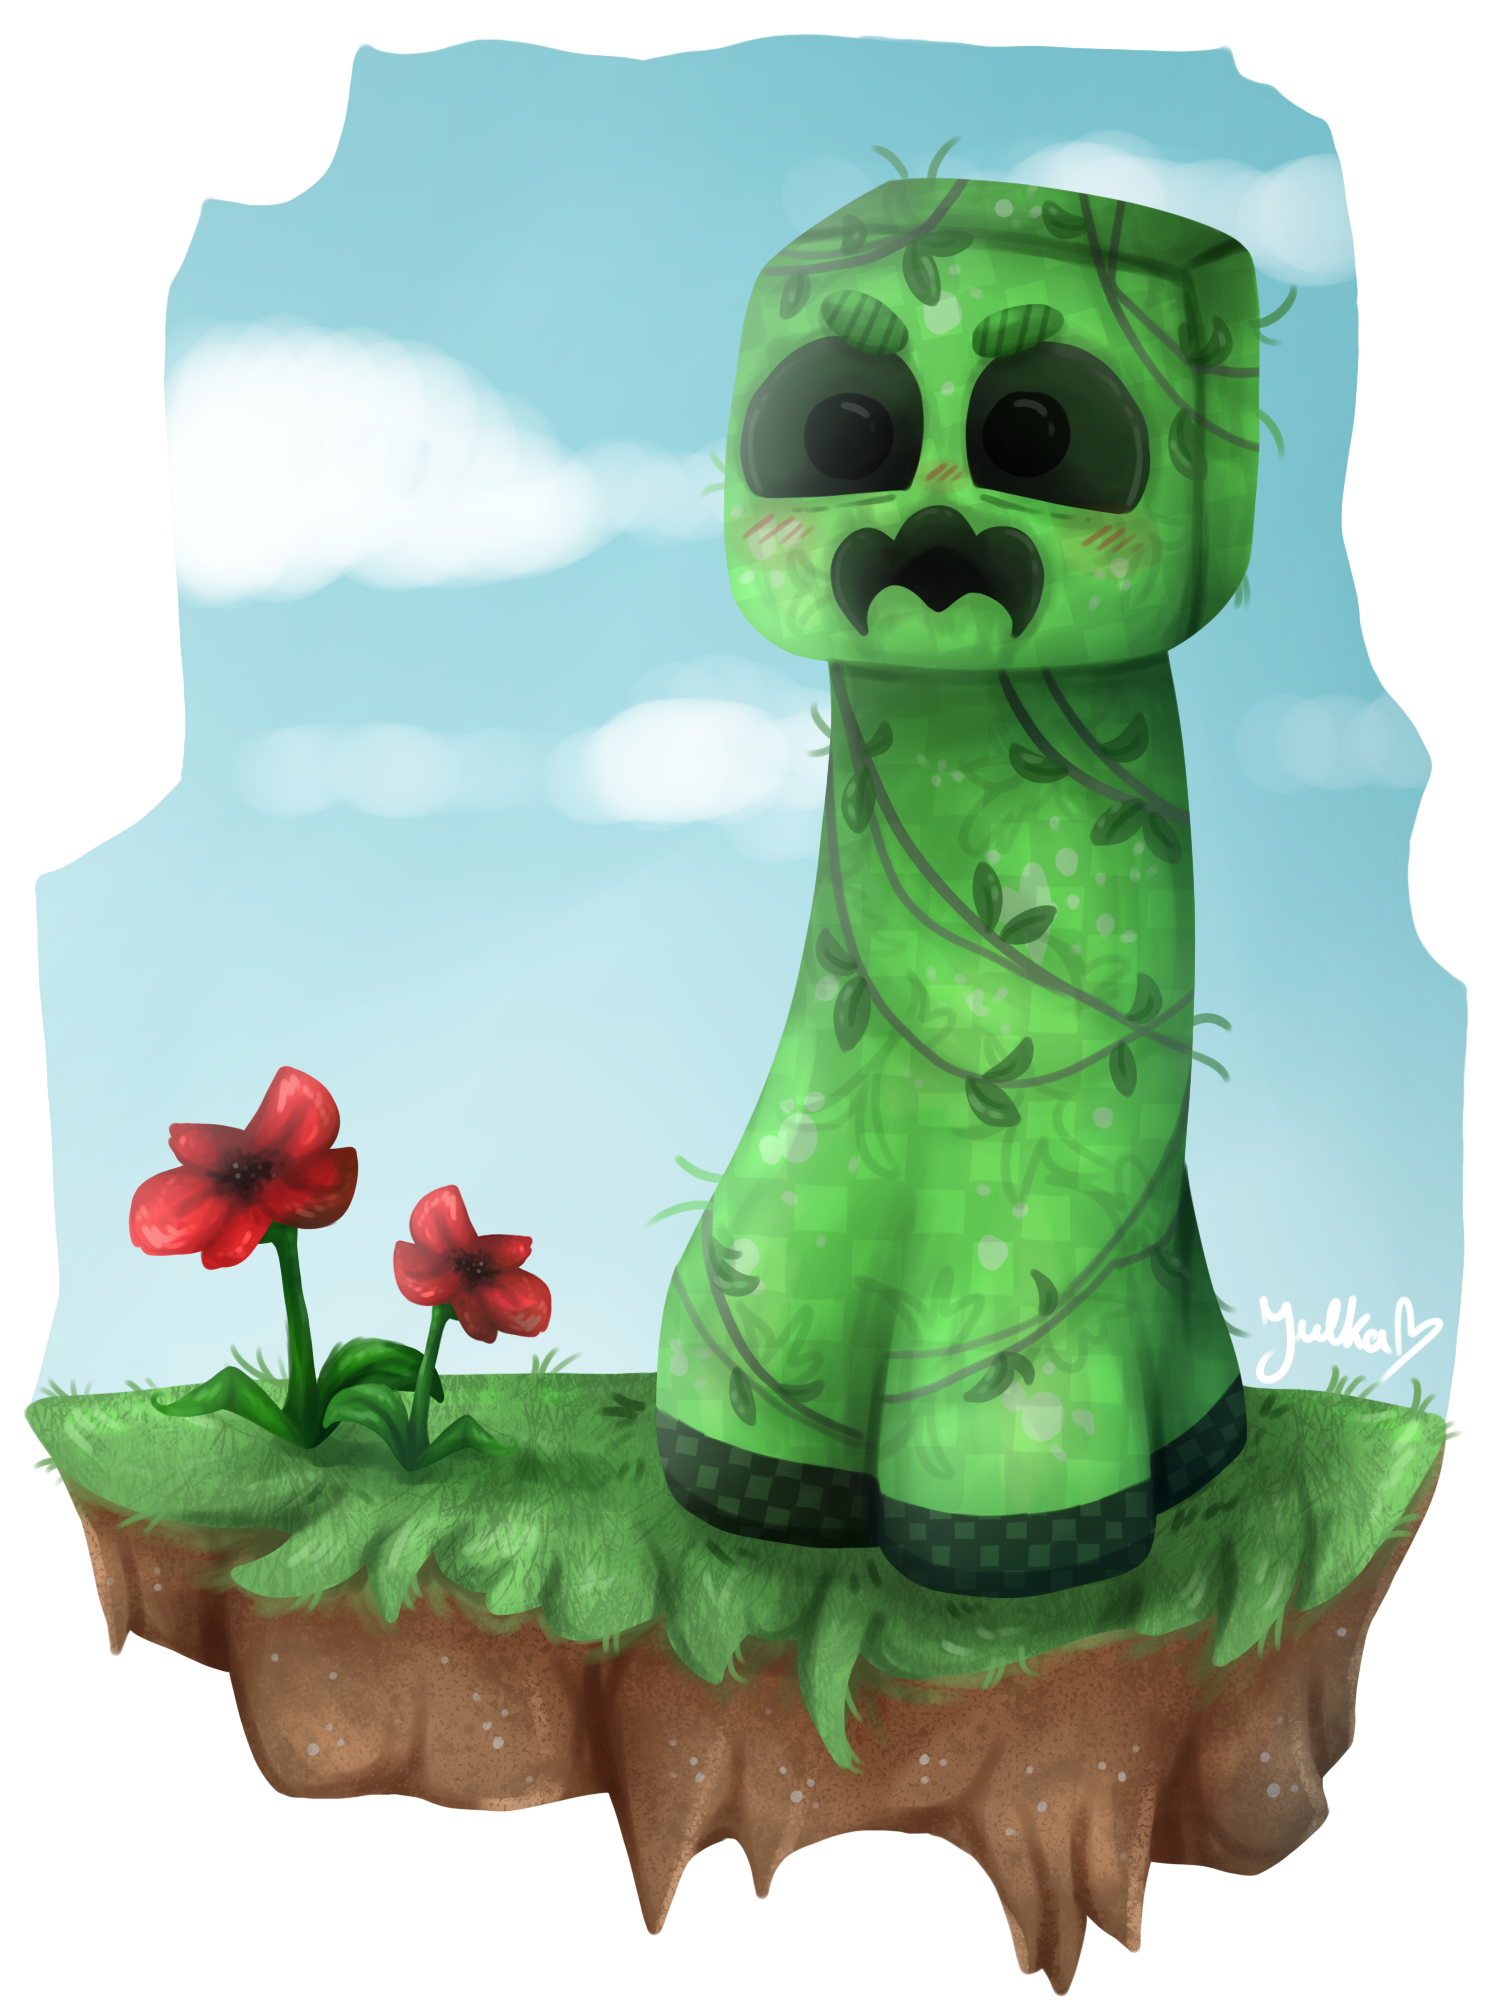 Portrait of a Creeper by AIBryce on DeviantArt